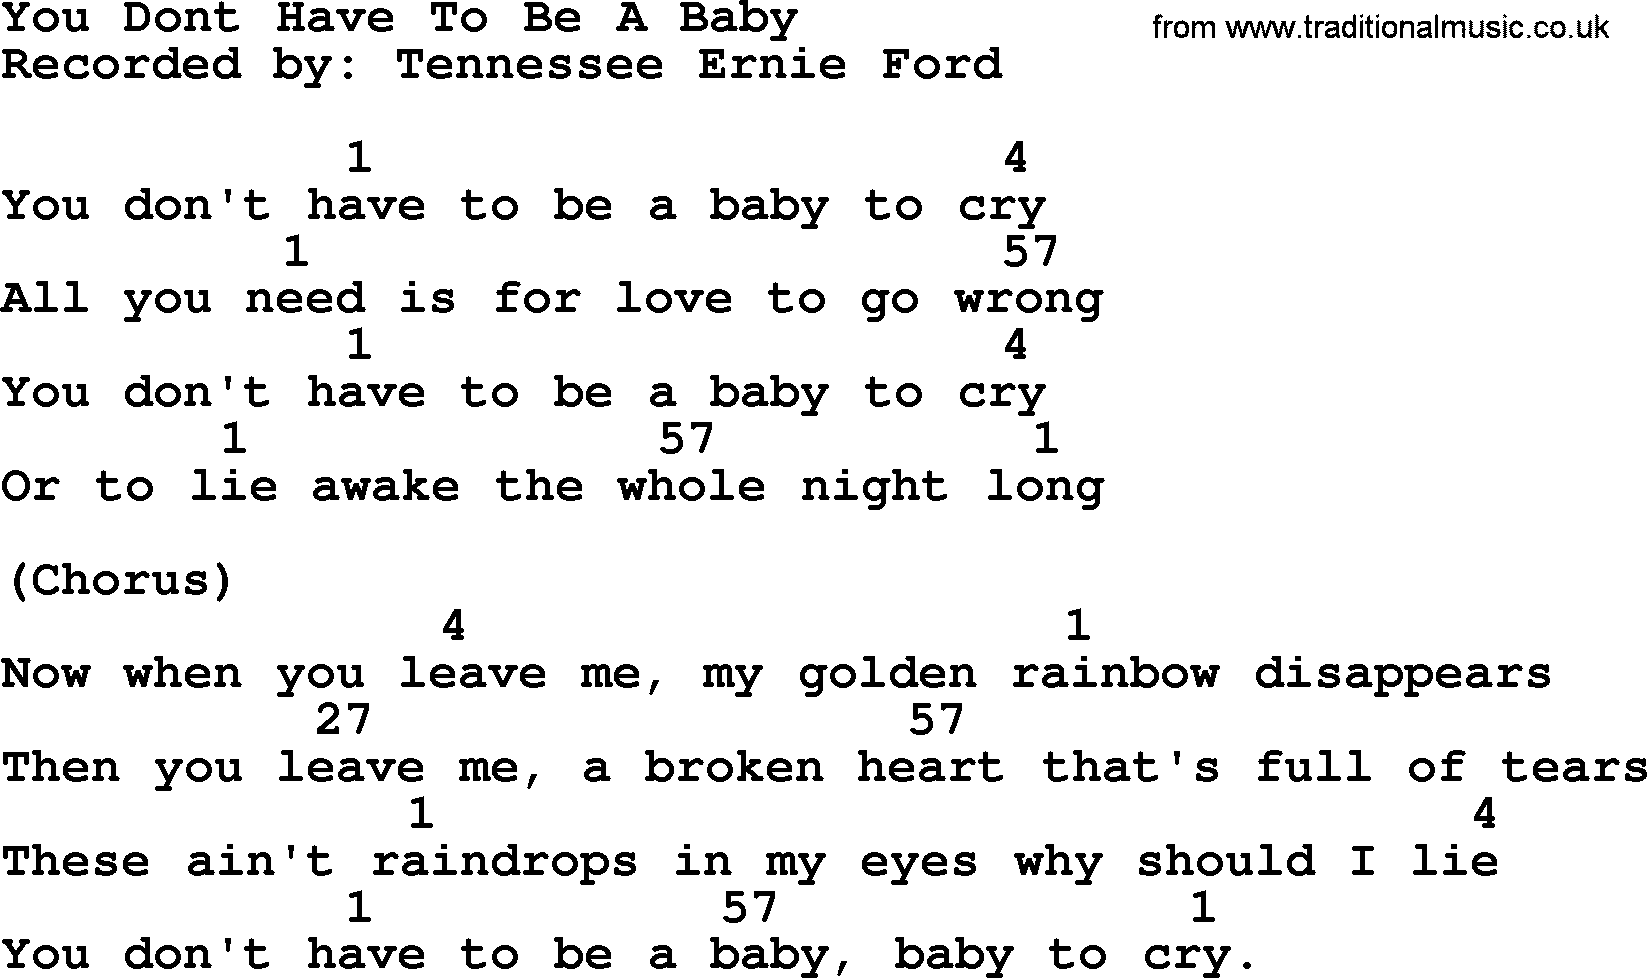 Bluegrass song: You Dont Have To Be A Baby, lyrics and chords